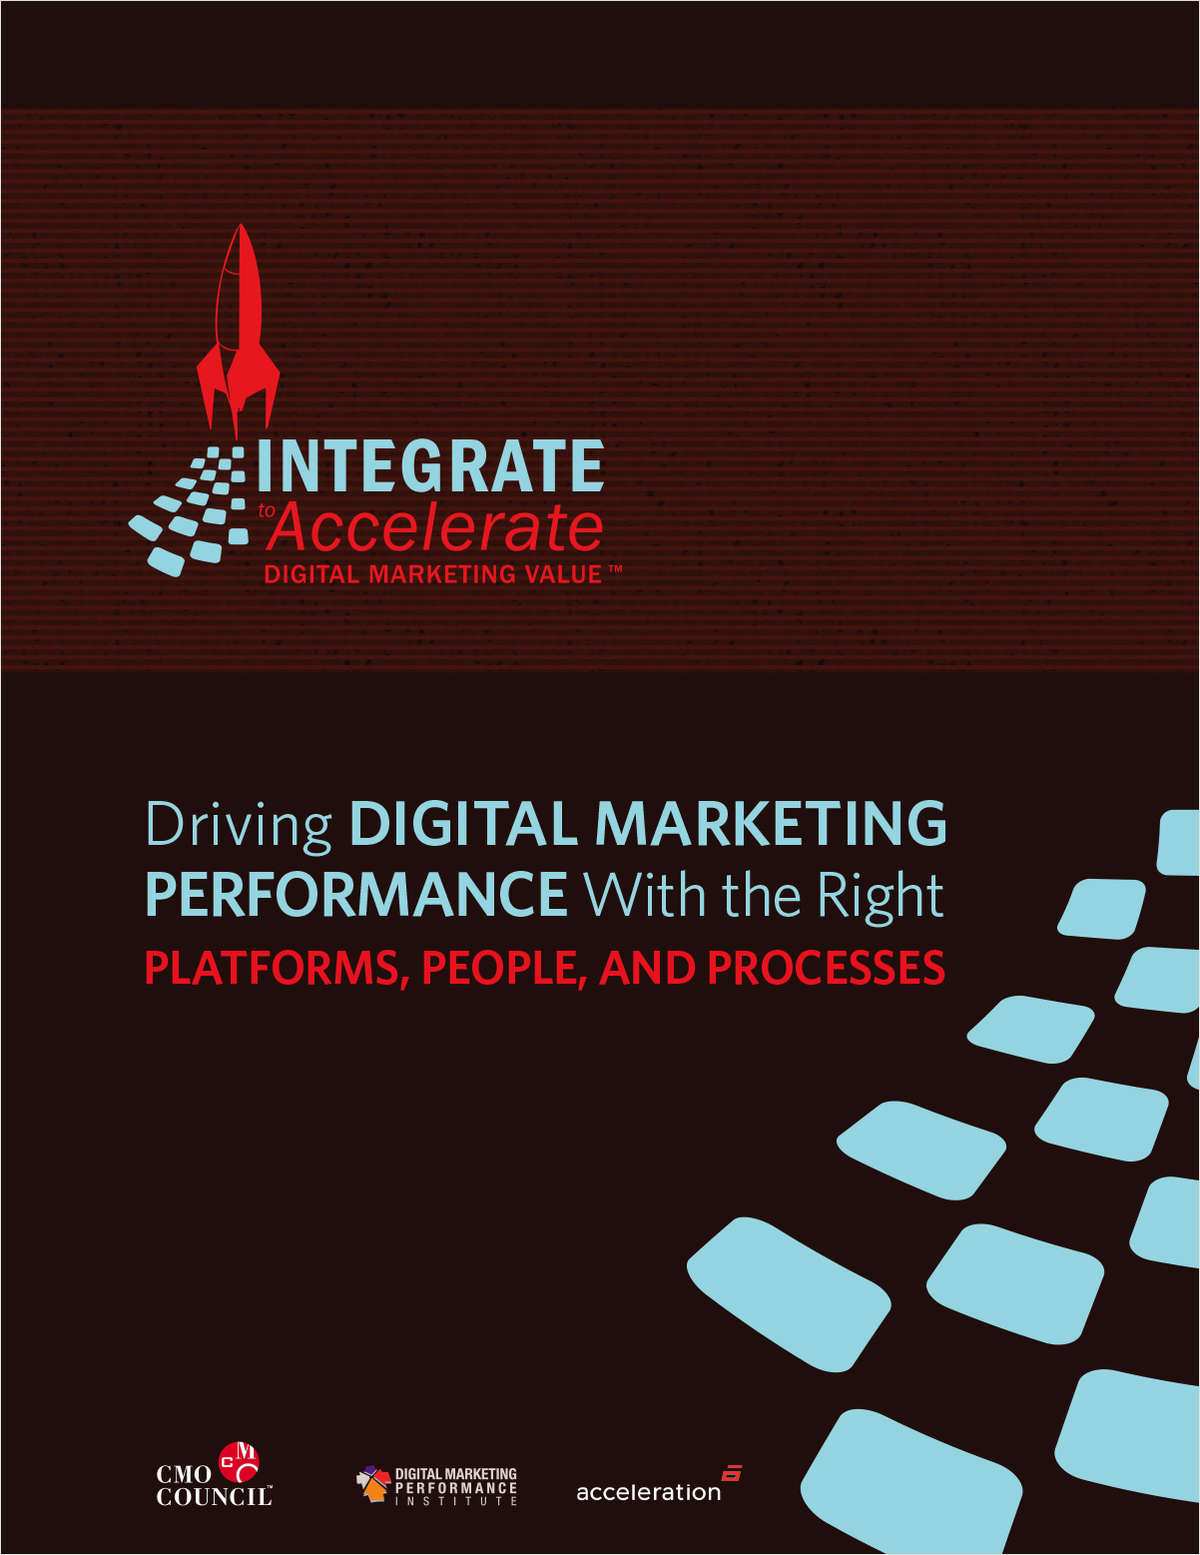 Driving eMarketing Performance With the Right Platforms, People, and Processes